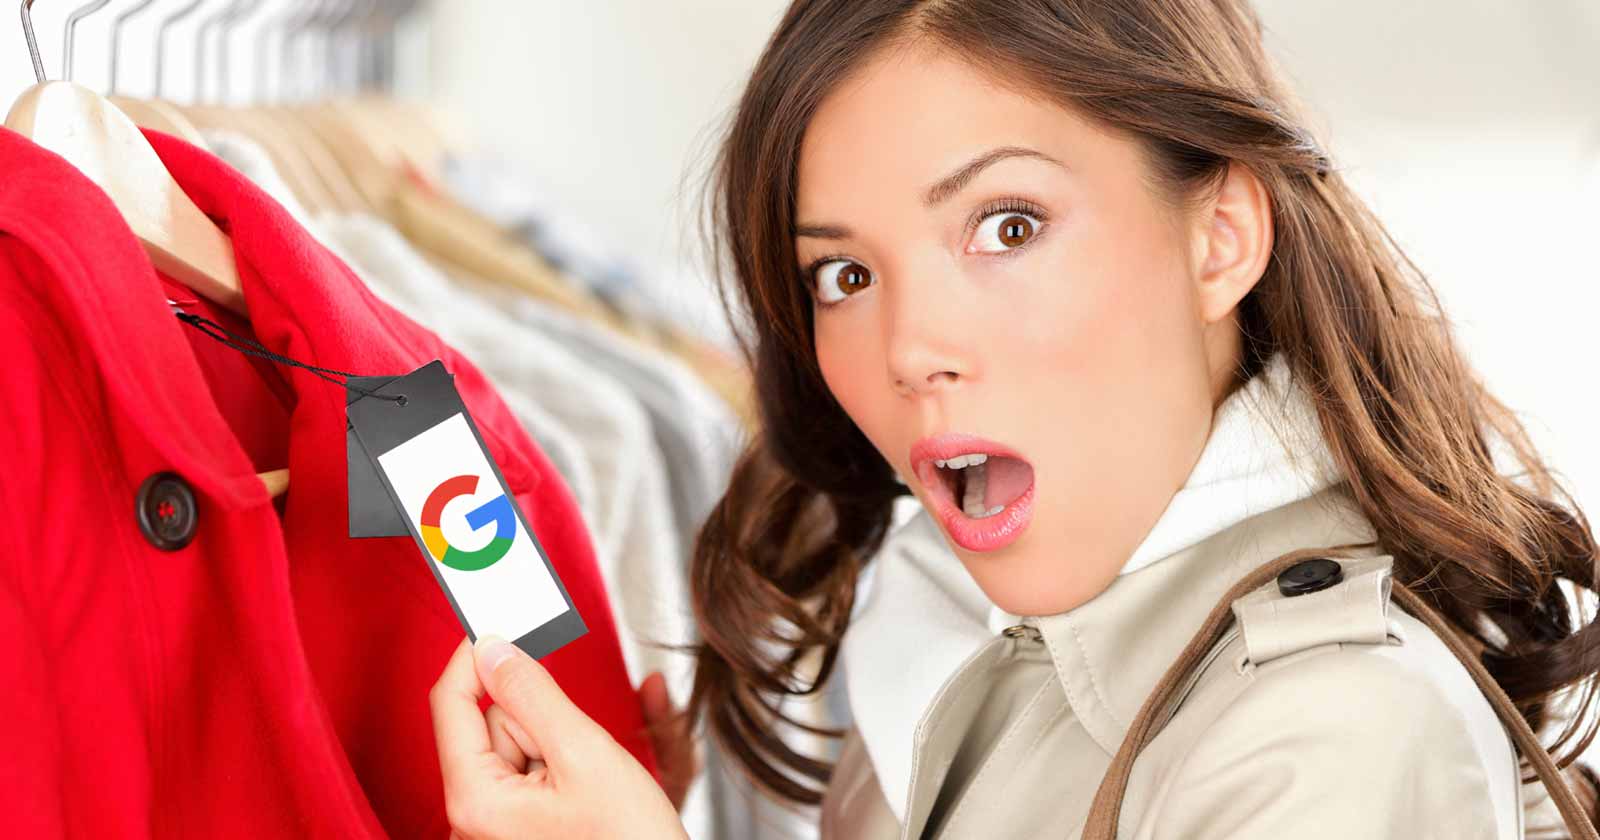 Image of a woman in shock at a price tag that has the Google logo where the price should be